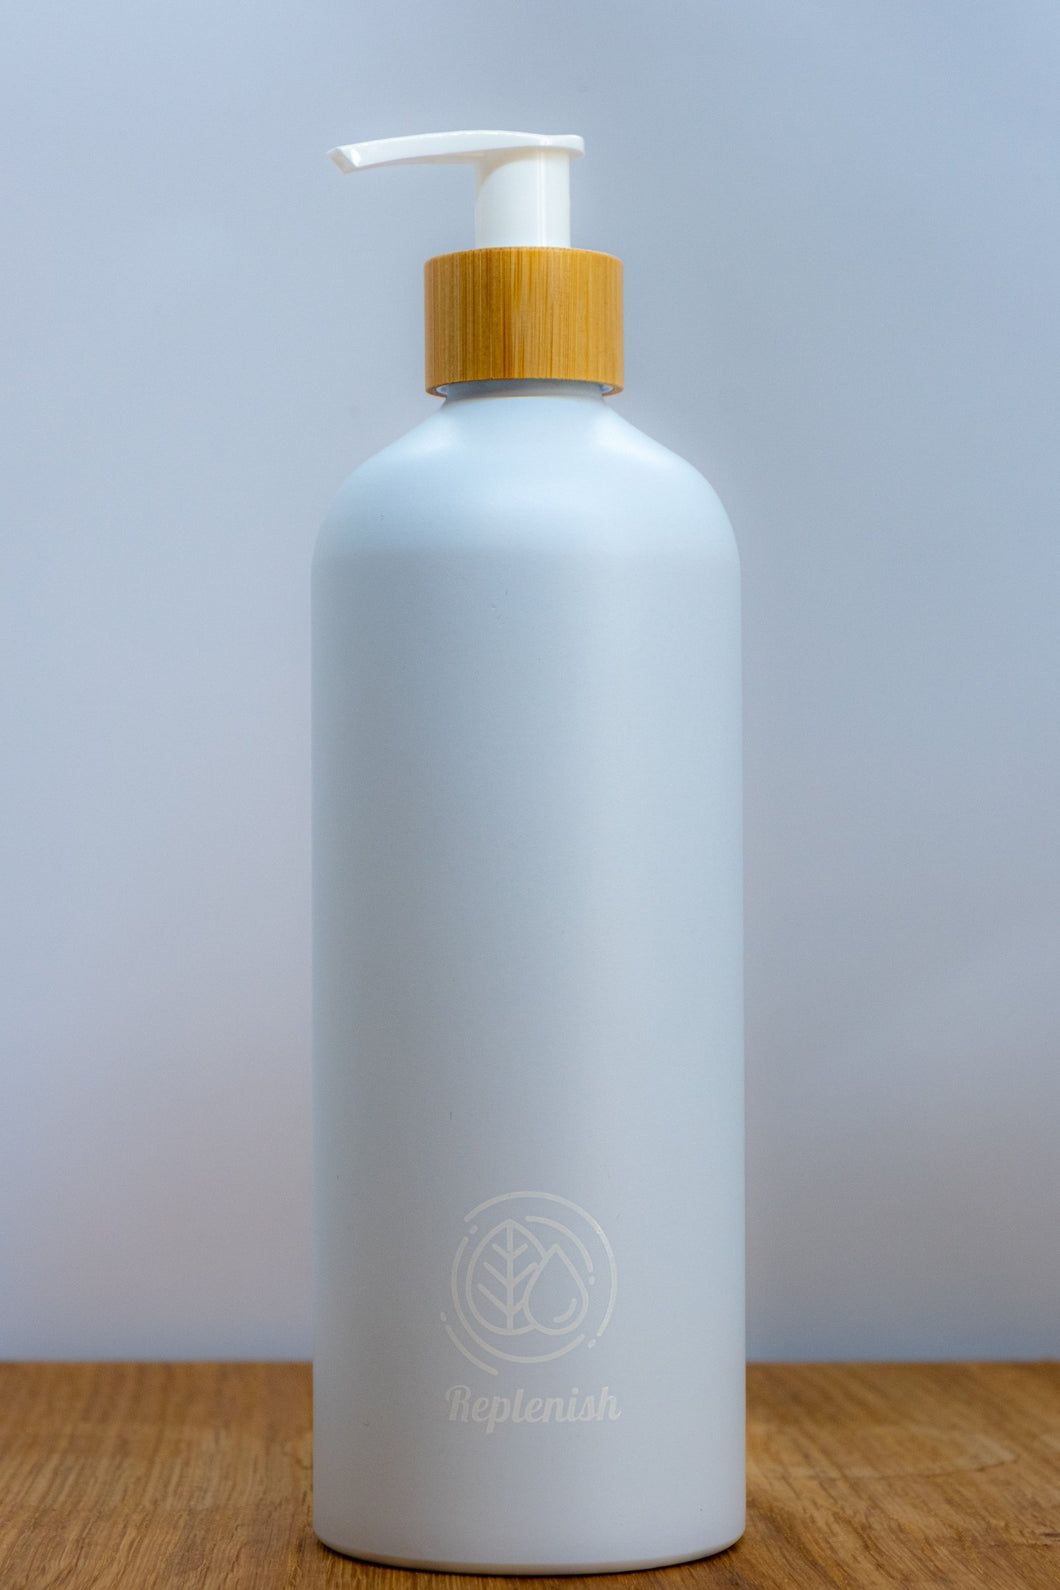 Replenish Bottle with Bamboo Lotion Pump filled with 500ml of Miniml Hair or Body Product